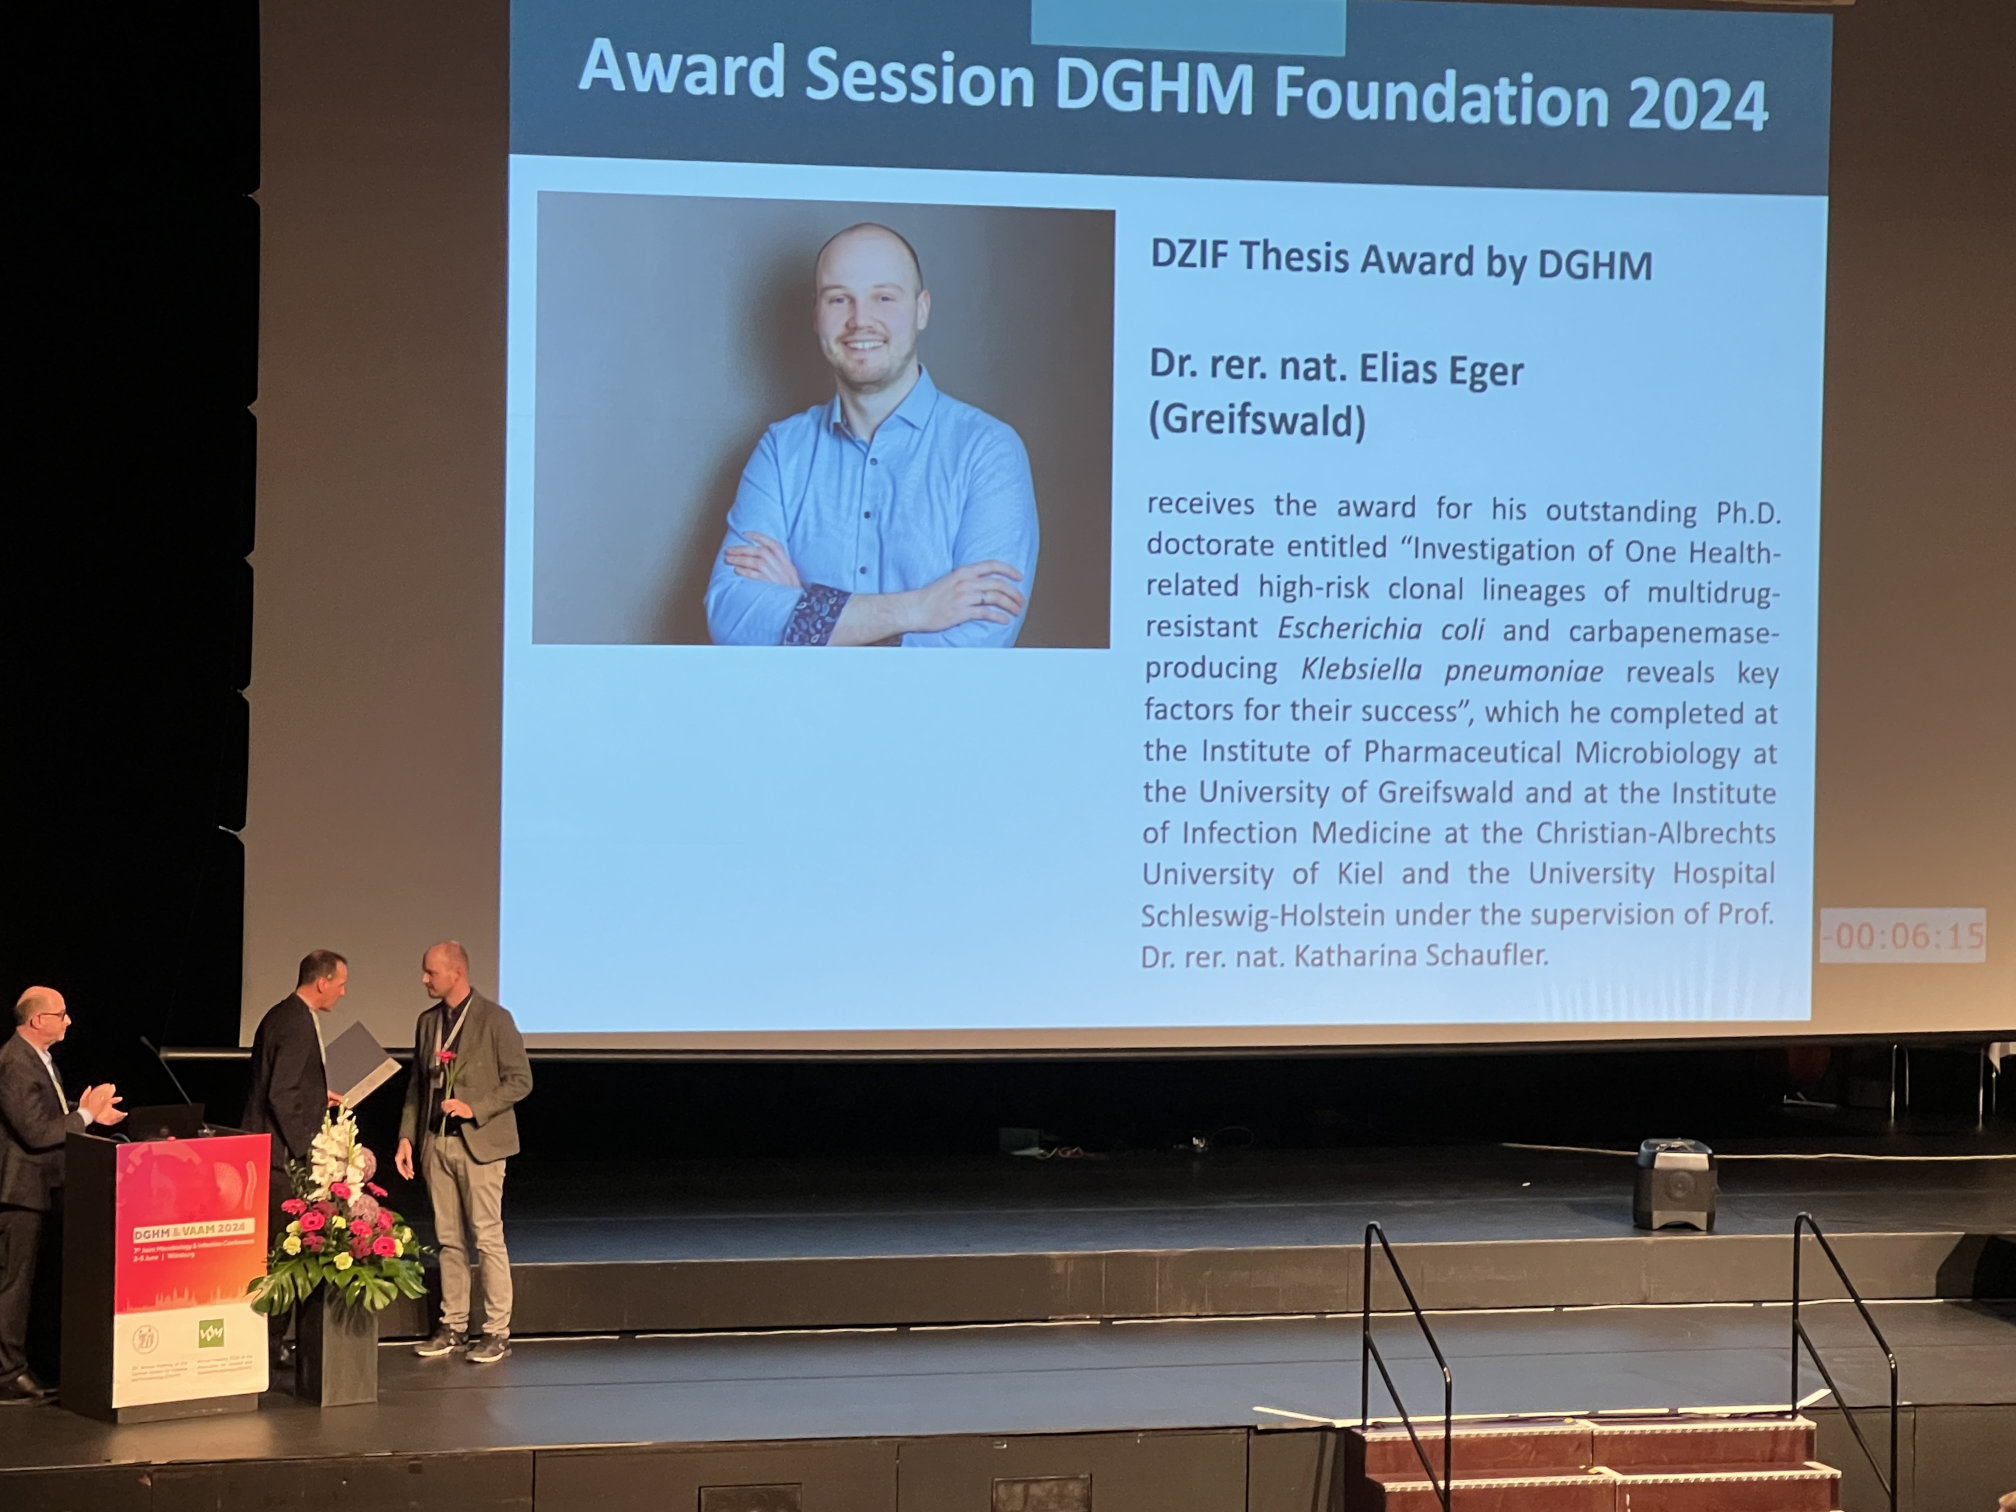 DZIF Thesis Award by DGHM